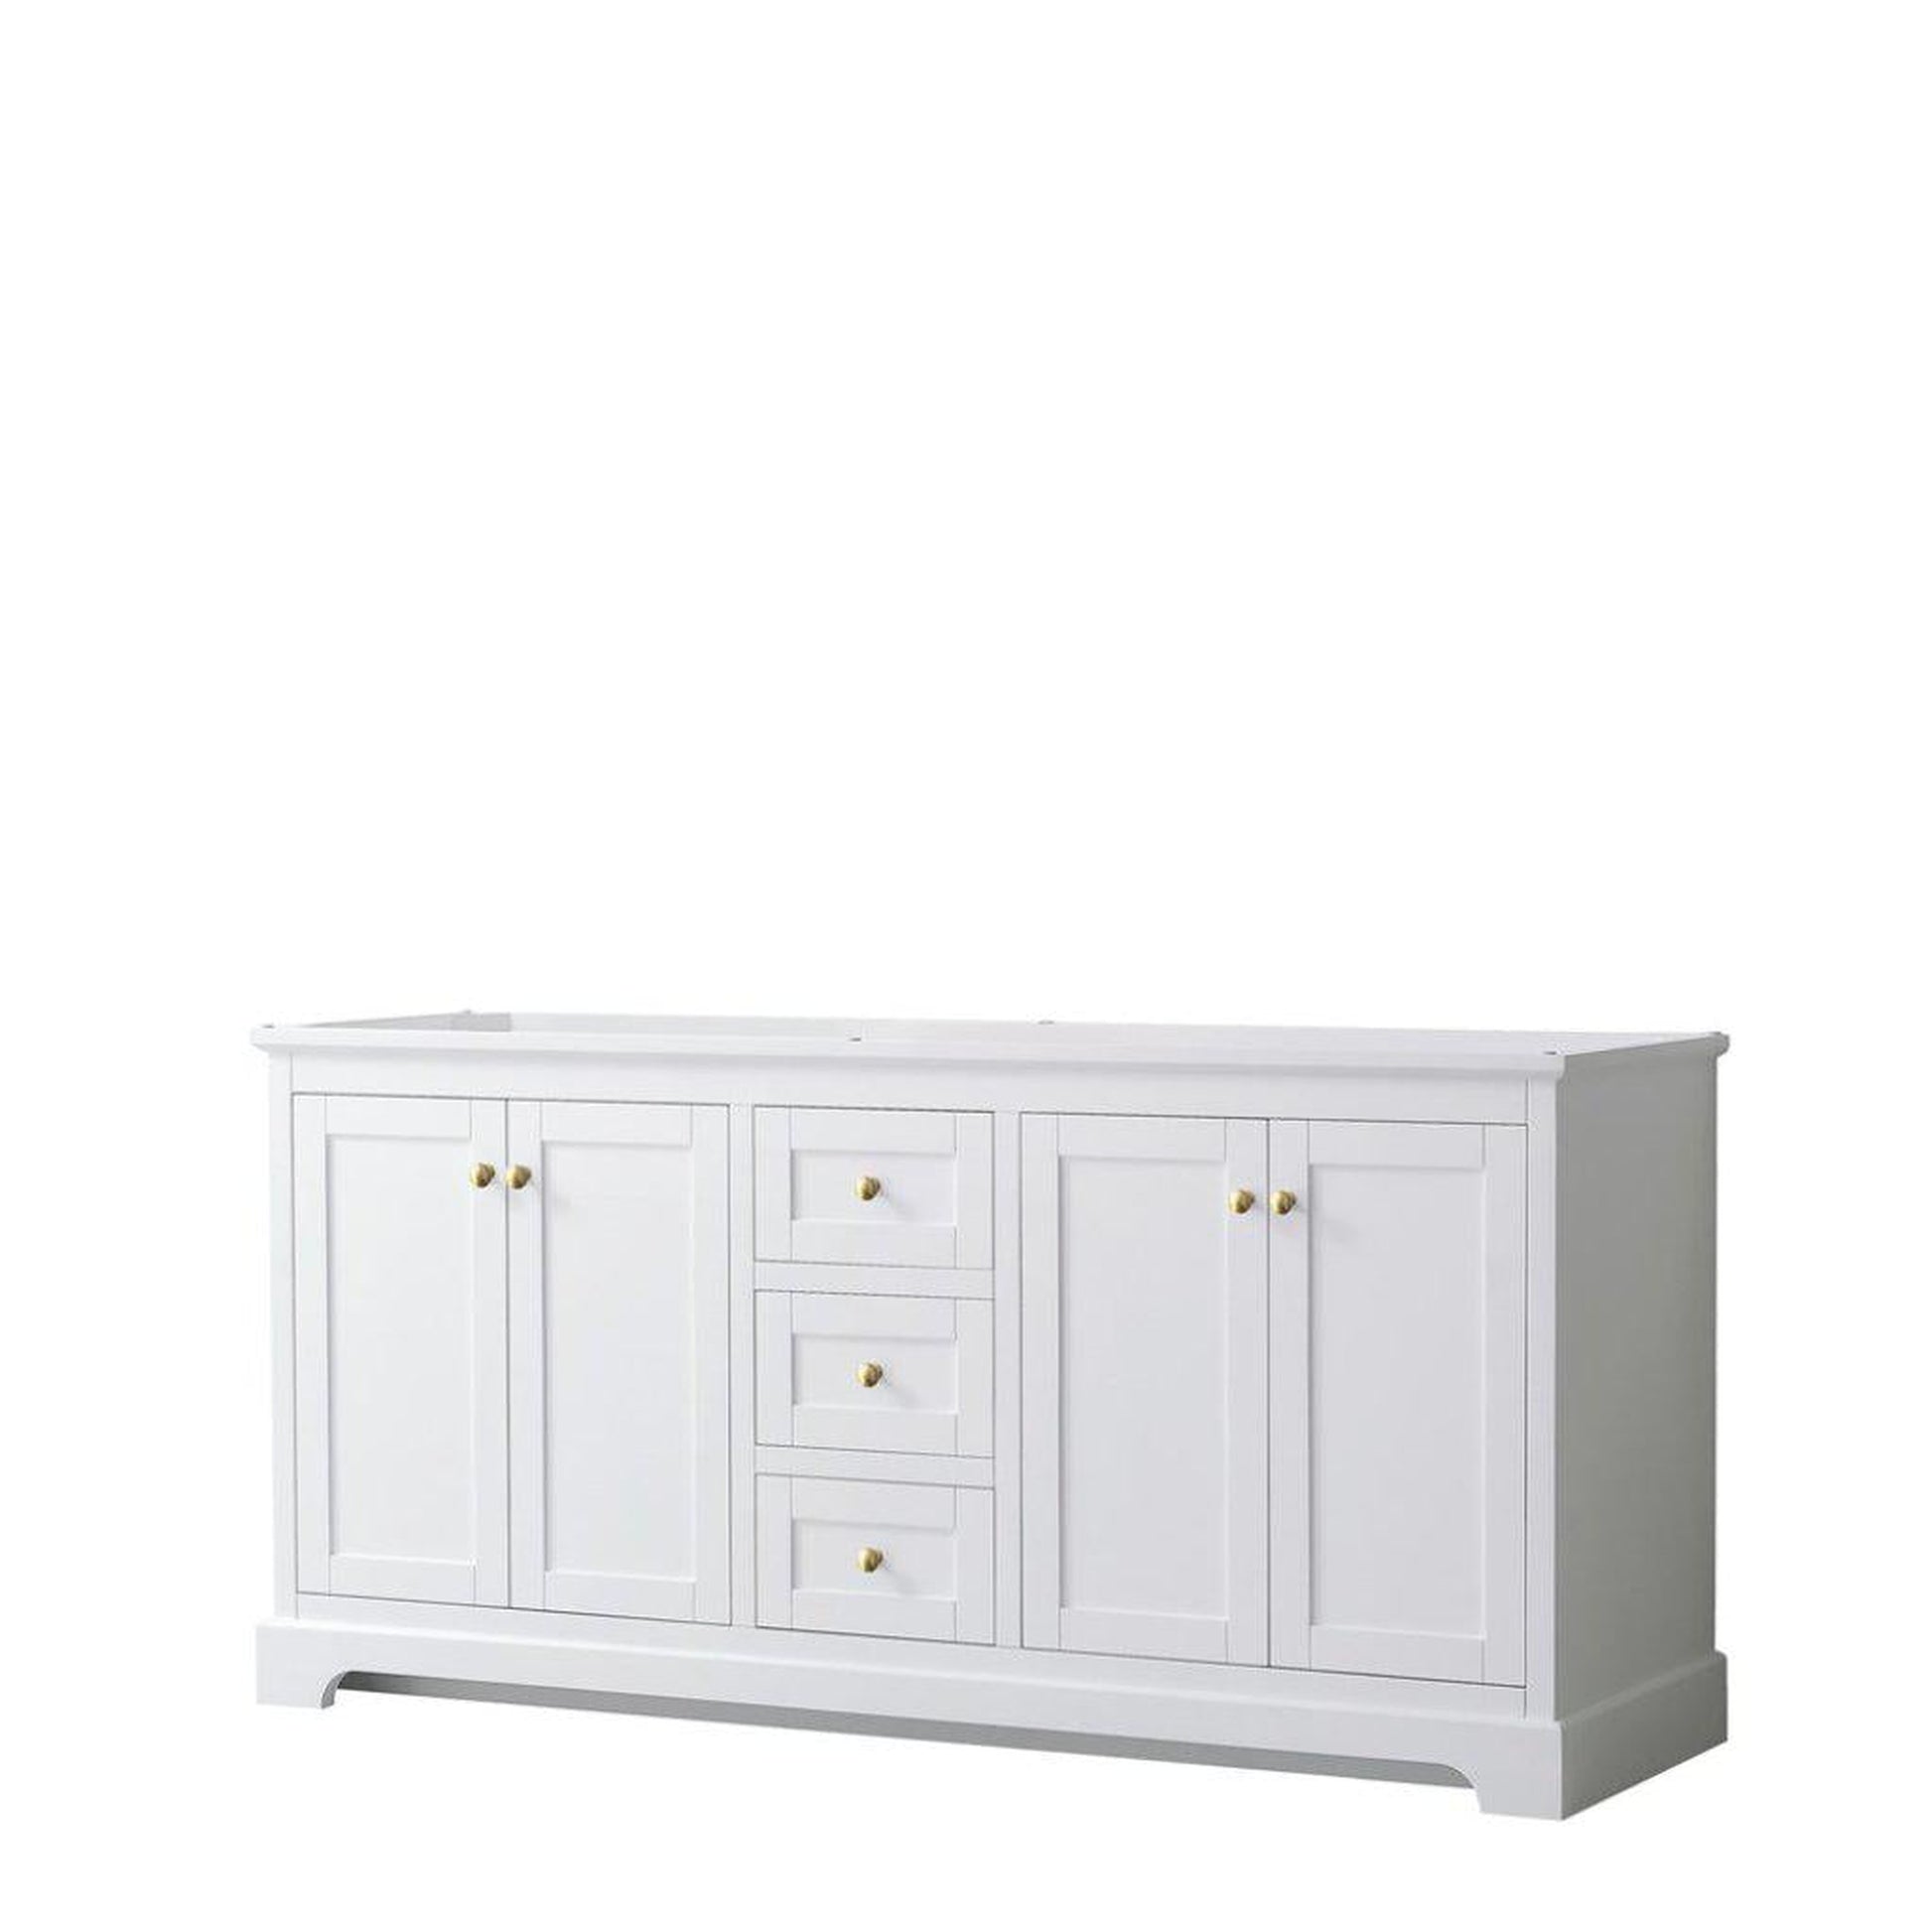 Wyndham Collection Avery 72" White Double Bathroom Vanity, Gold Trims